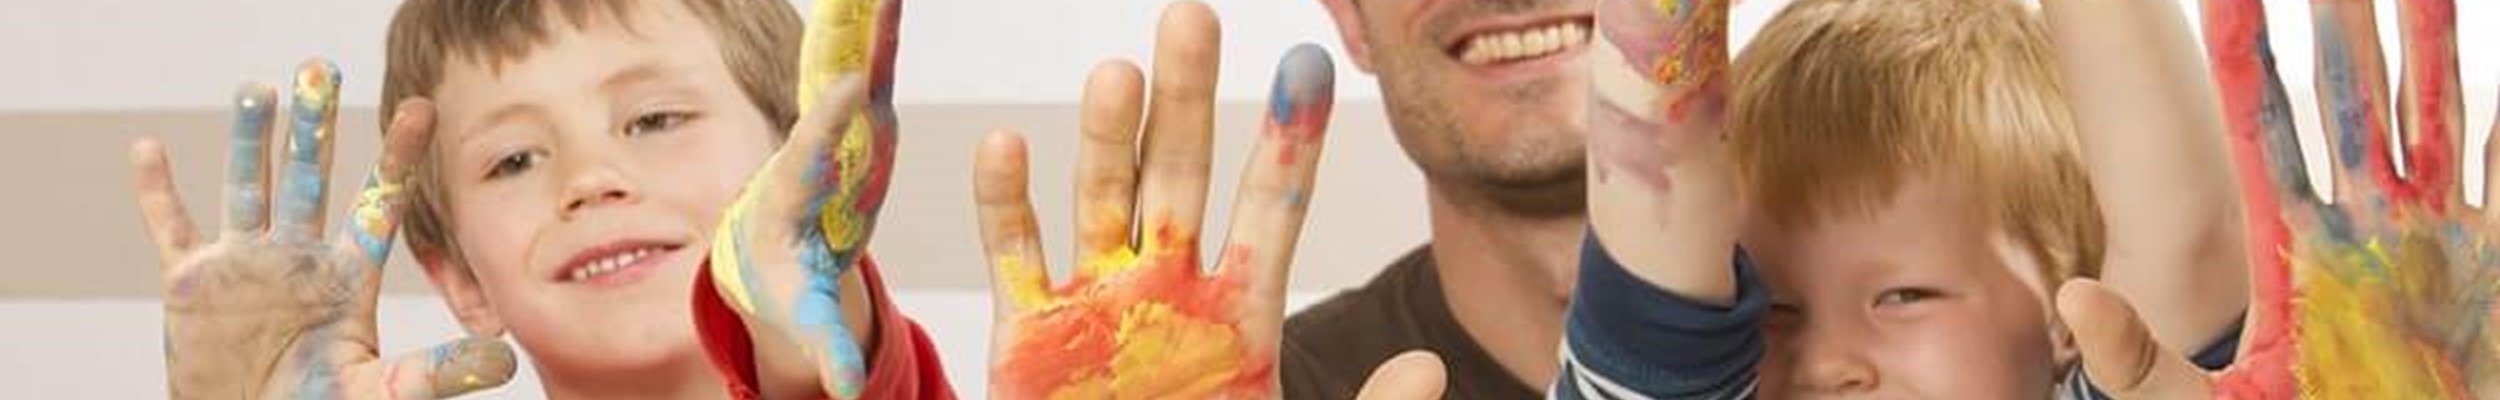 Children and father with paint on hands